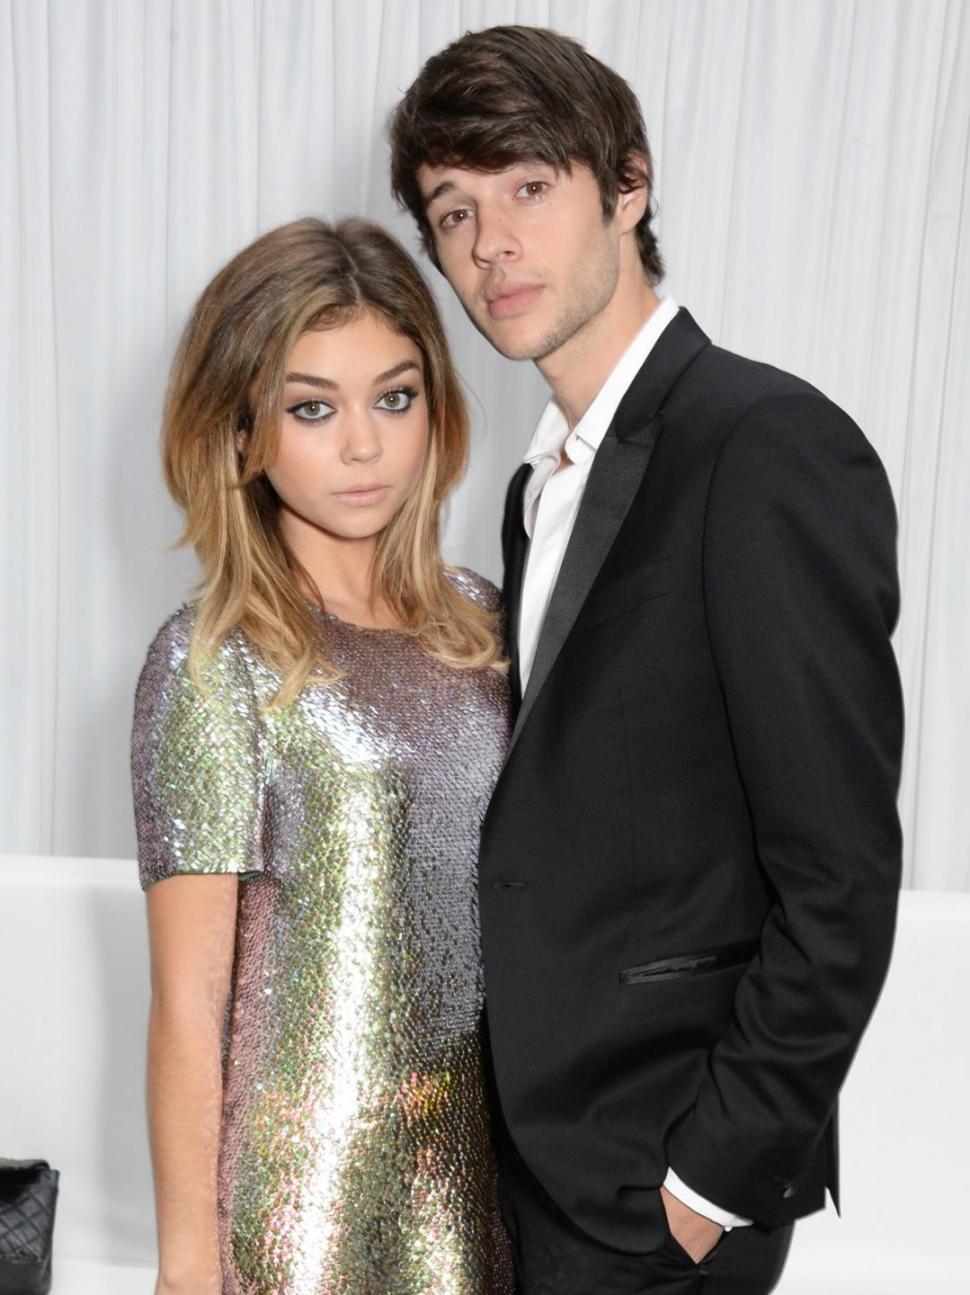 The couple pictured in June: It appears the former Disney Channel co-stars called it quits earlier this month ahead of the Emmy Awards.